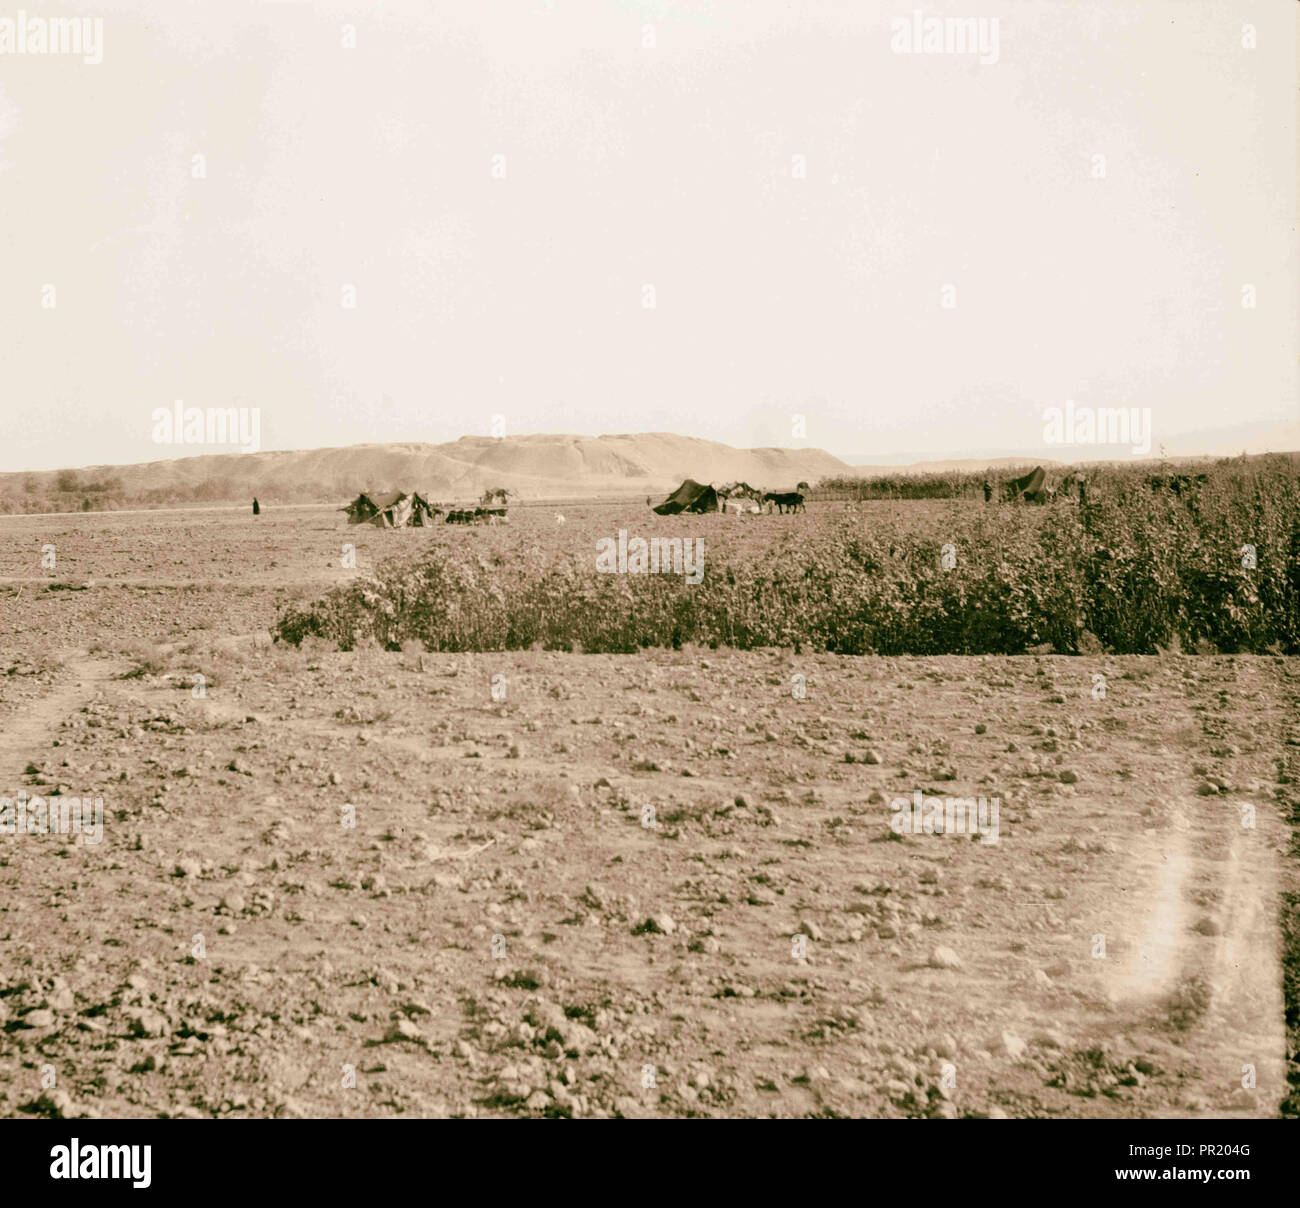 Iraq. Nineveh. 'The Glory of Kingdoms.' Mounds covering ancient site taken from a distance. 1932, Iraq, Ninevah, Extinct city Stock Photo